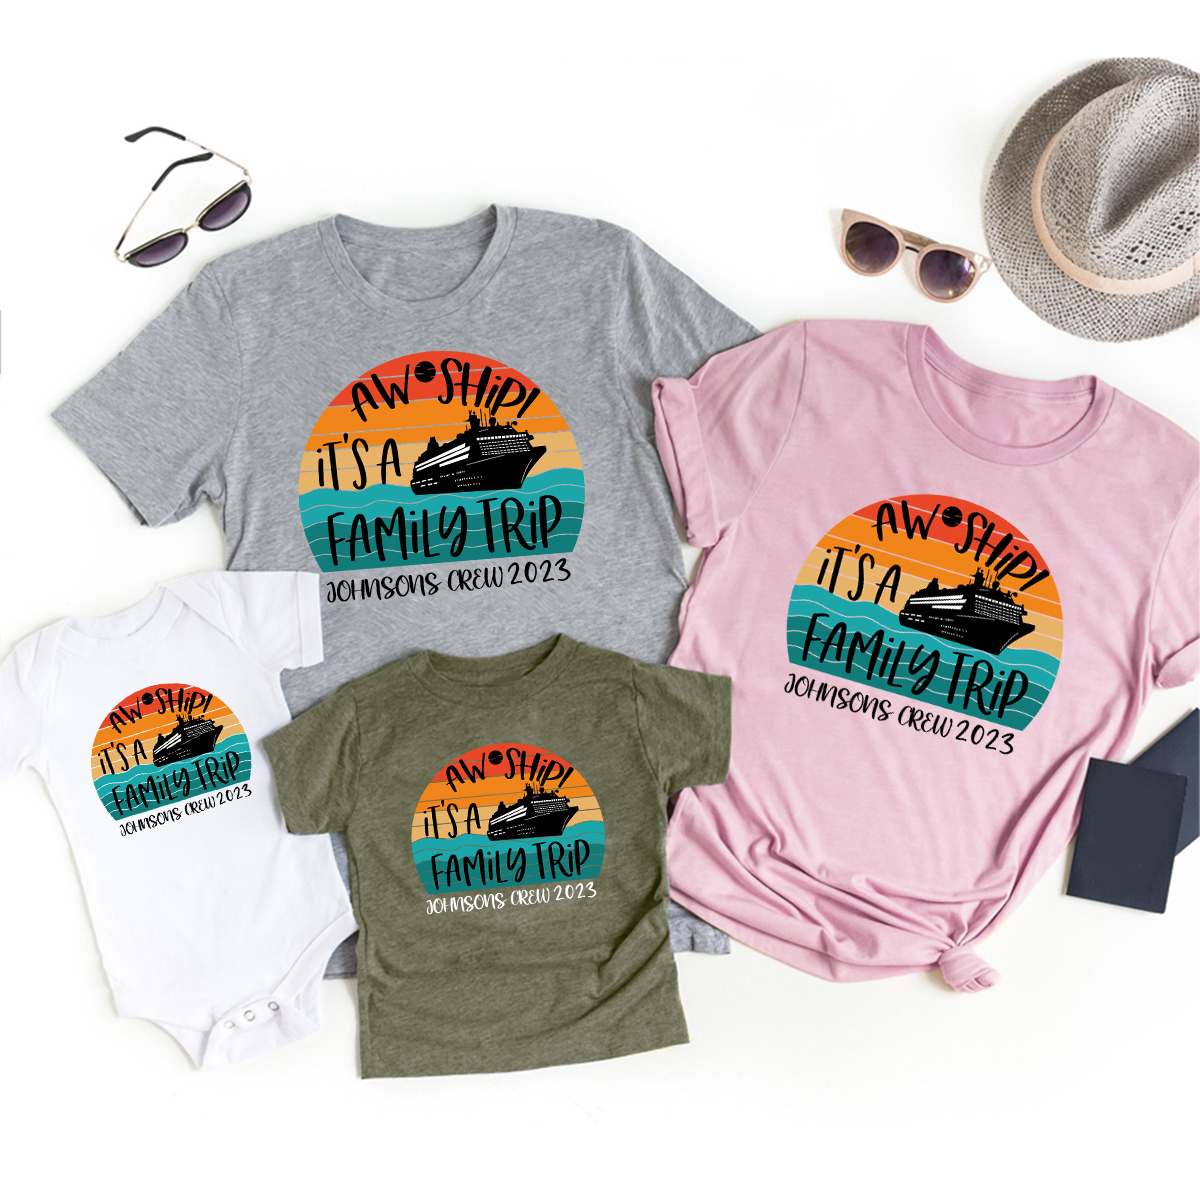 Aw Ship! It's a Family Trip Cruise Family Vacation Shirts